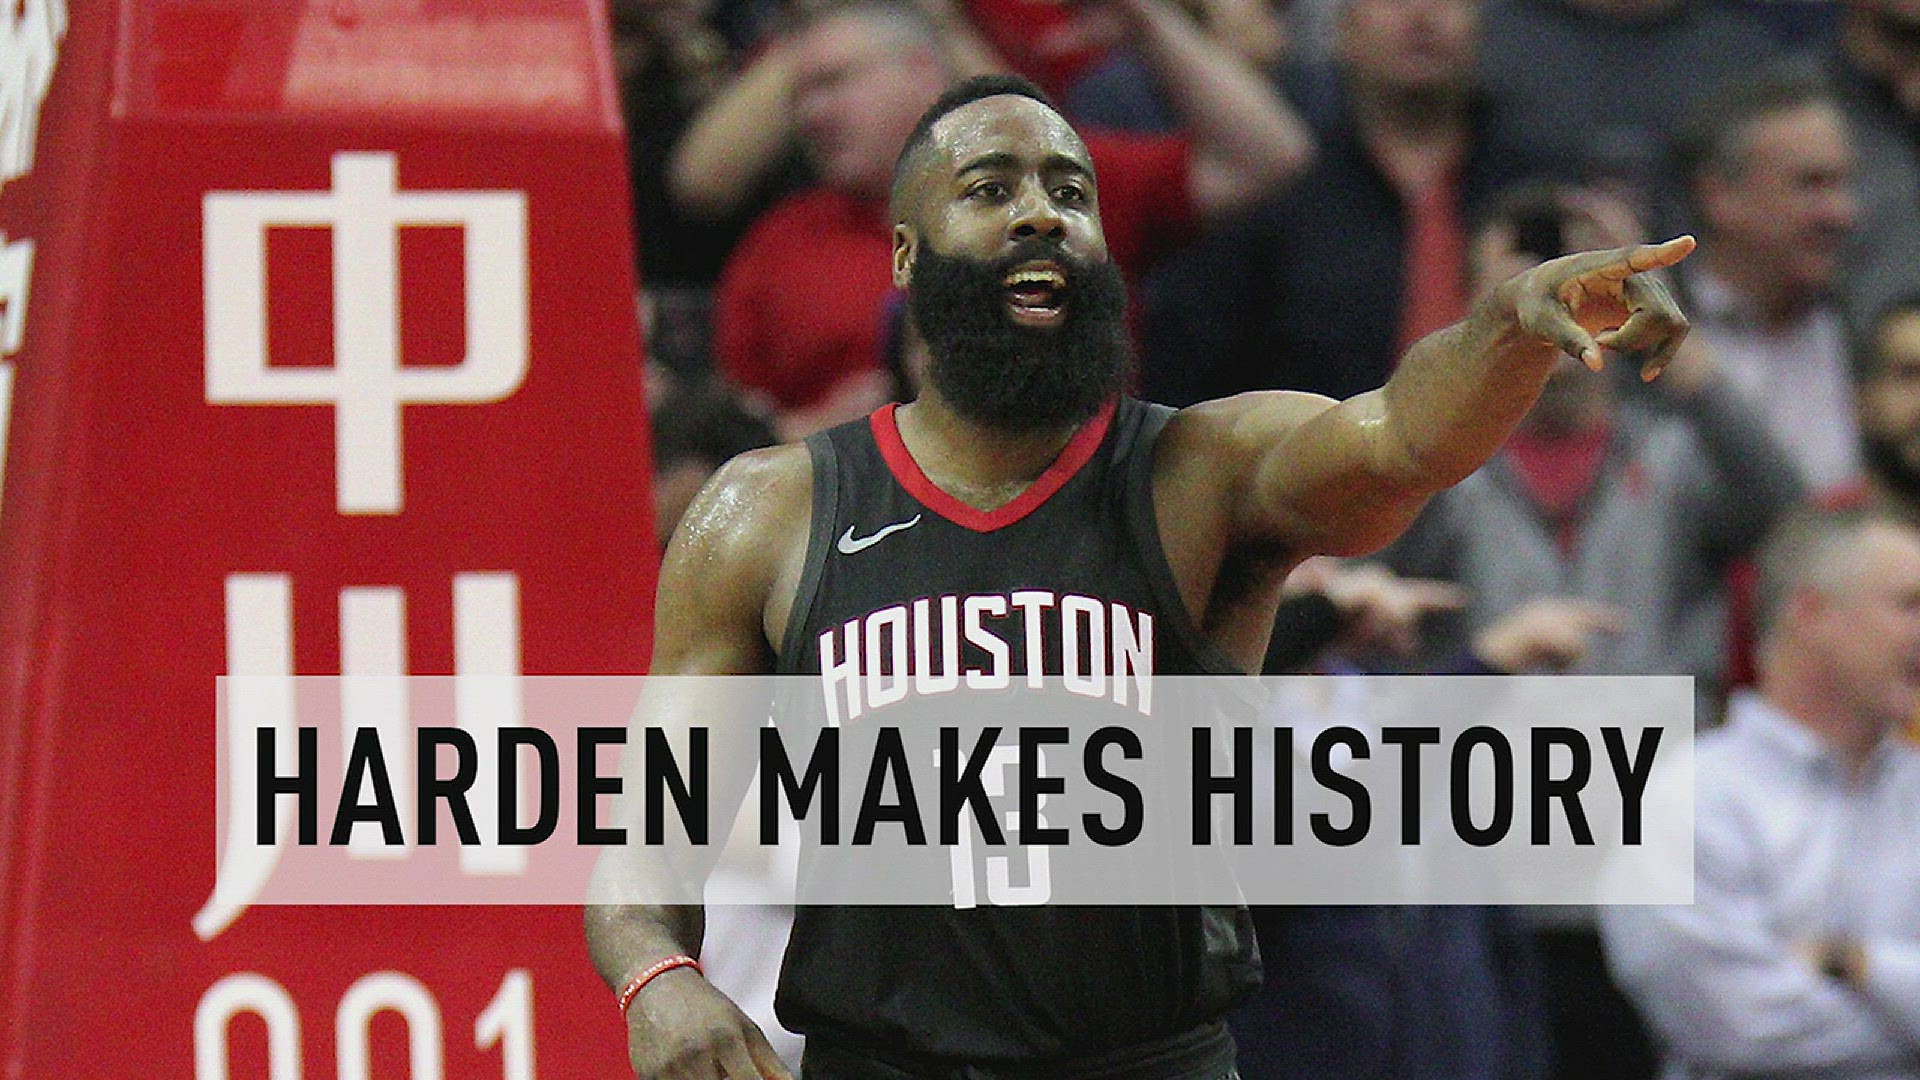 James Harden became the first player in NBA history to score 60 points as part of a triple-double as the short-handed Houston Rockets beat the Orlando Magic 114-107 on Tuesday night.